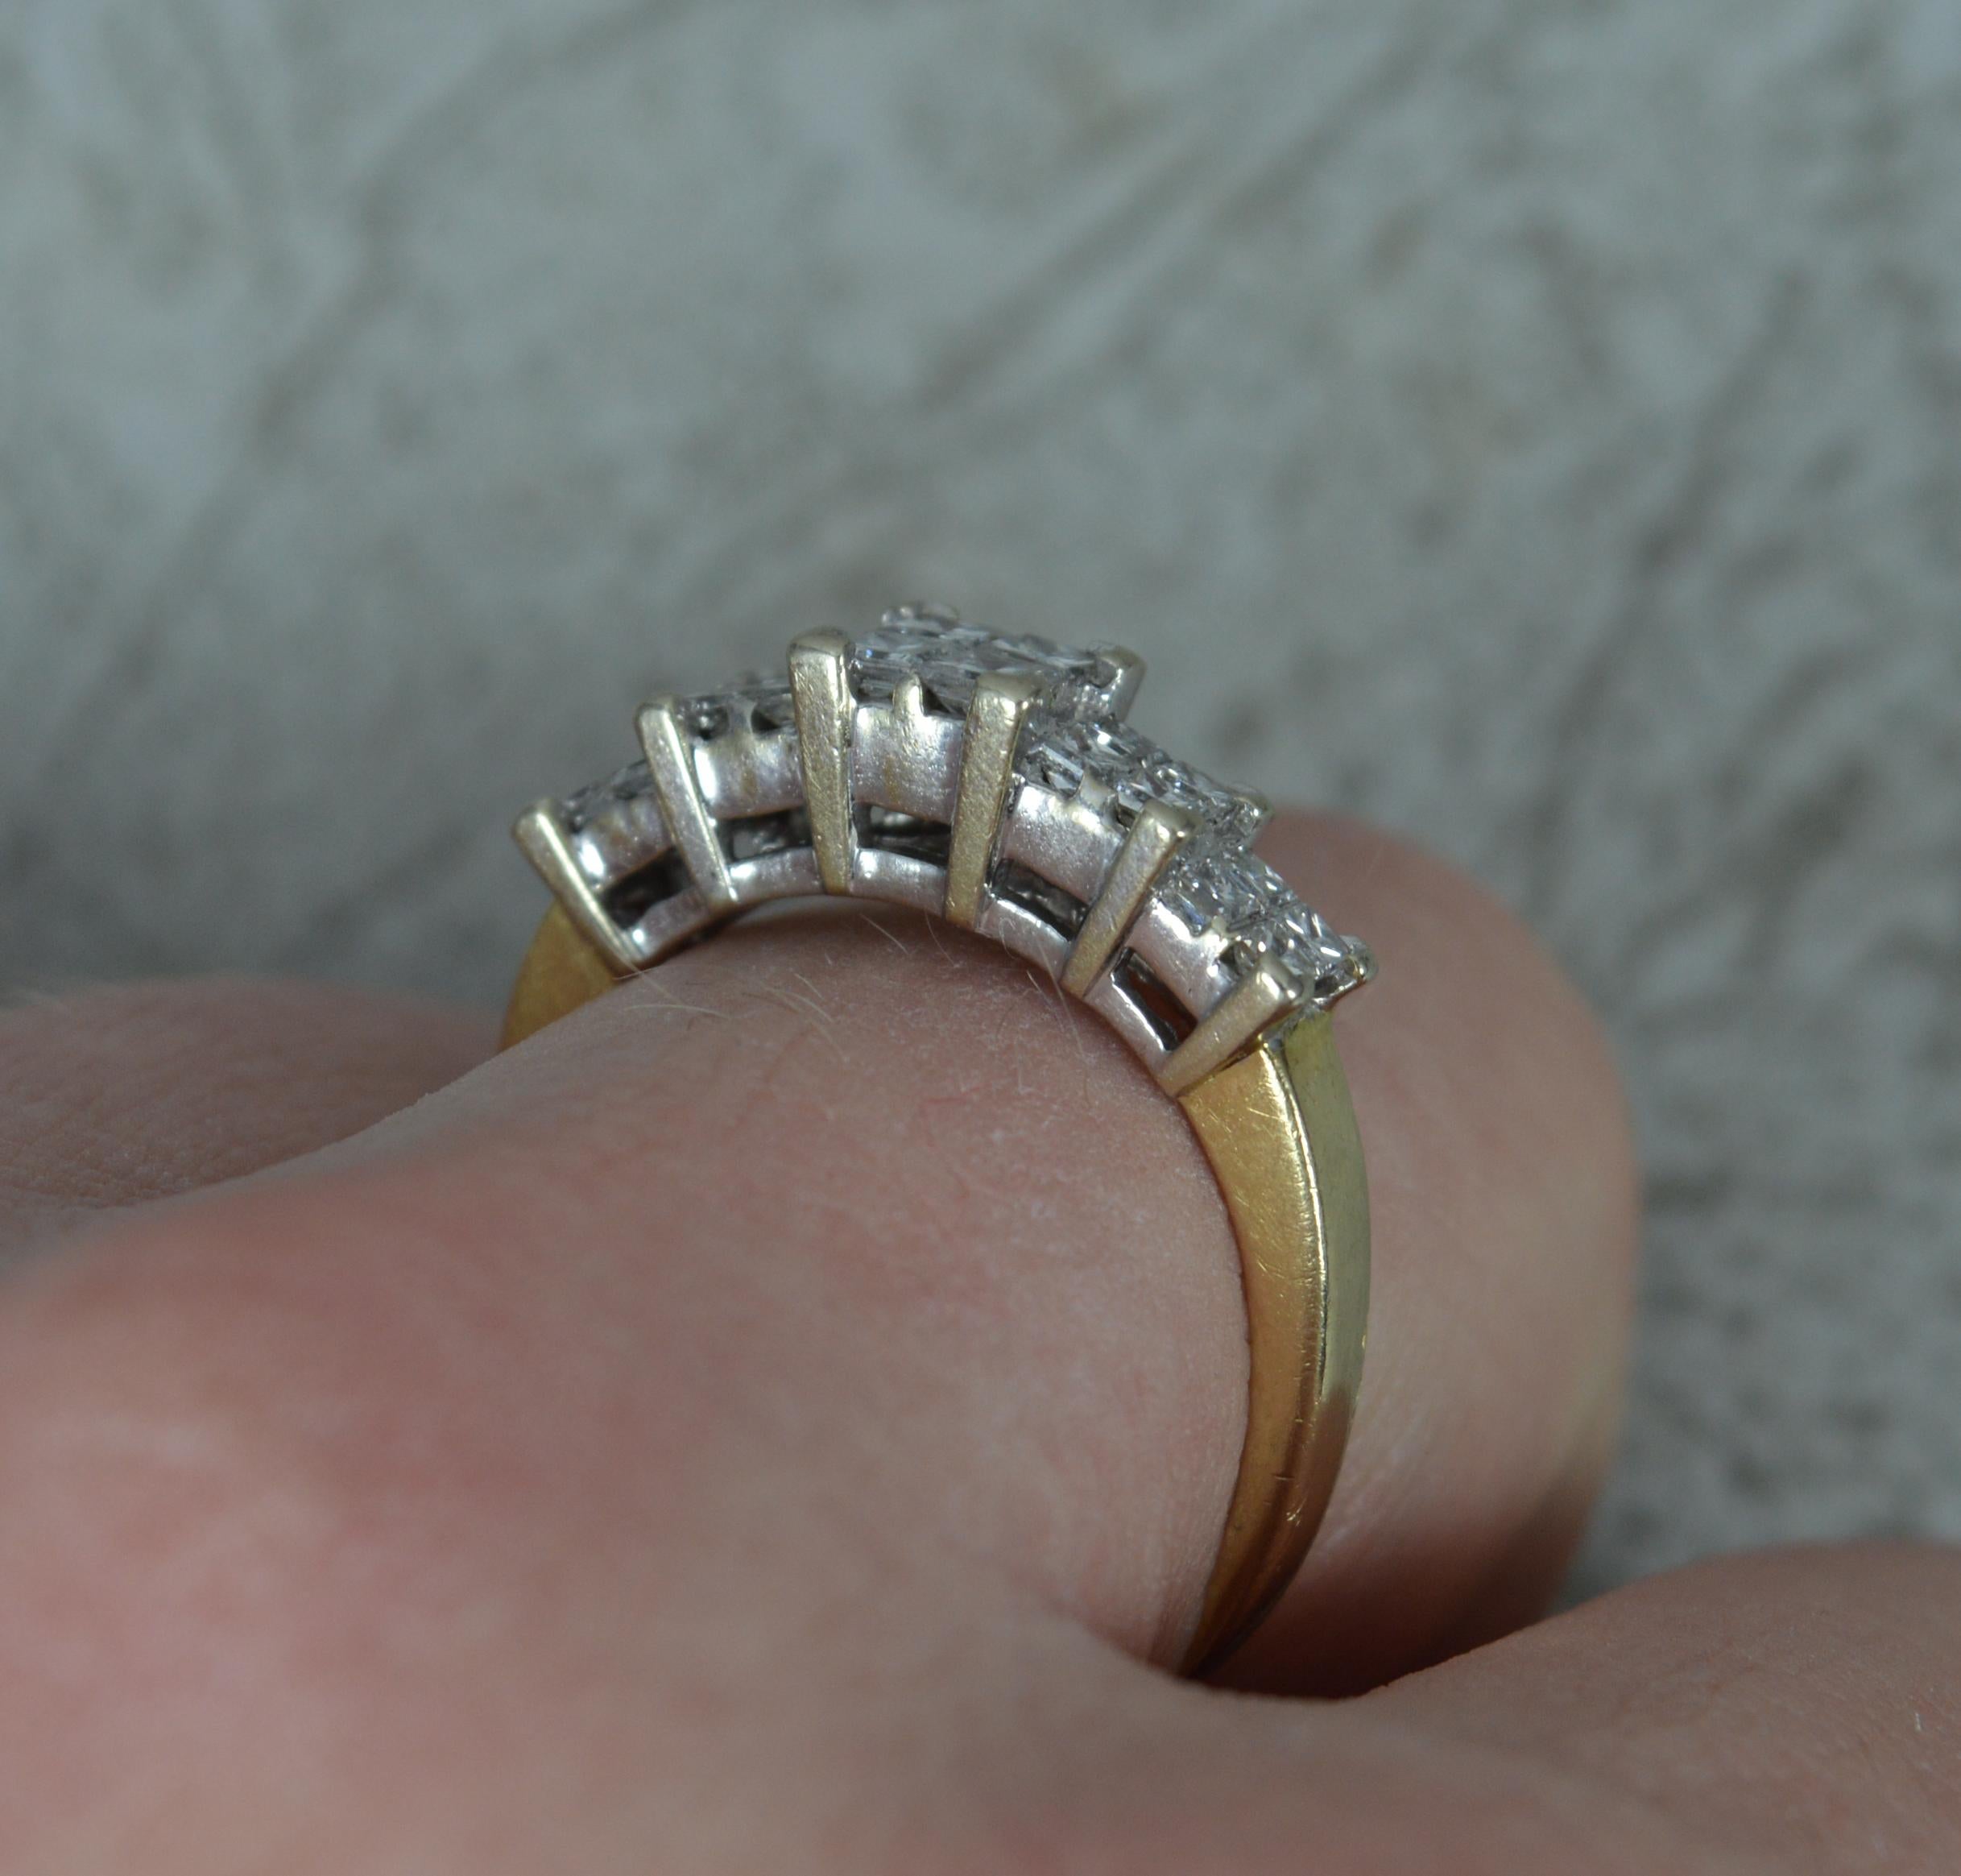 A 14 carat gold and diamond ring.
​14 carat yellow gold shank and white gold head setting.
Designed with five clusters of four princess cut diamonds. To total 1.00 carats approx.
20mm spread of stones. Protruding 5.5mm off the finger, 

CONDITION ;